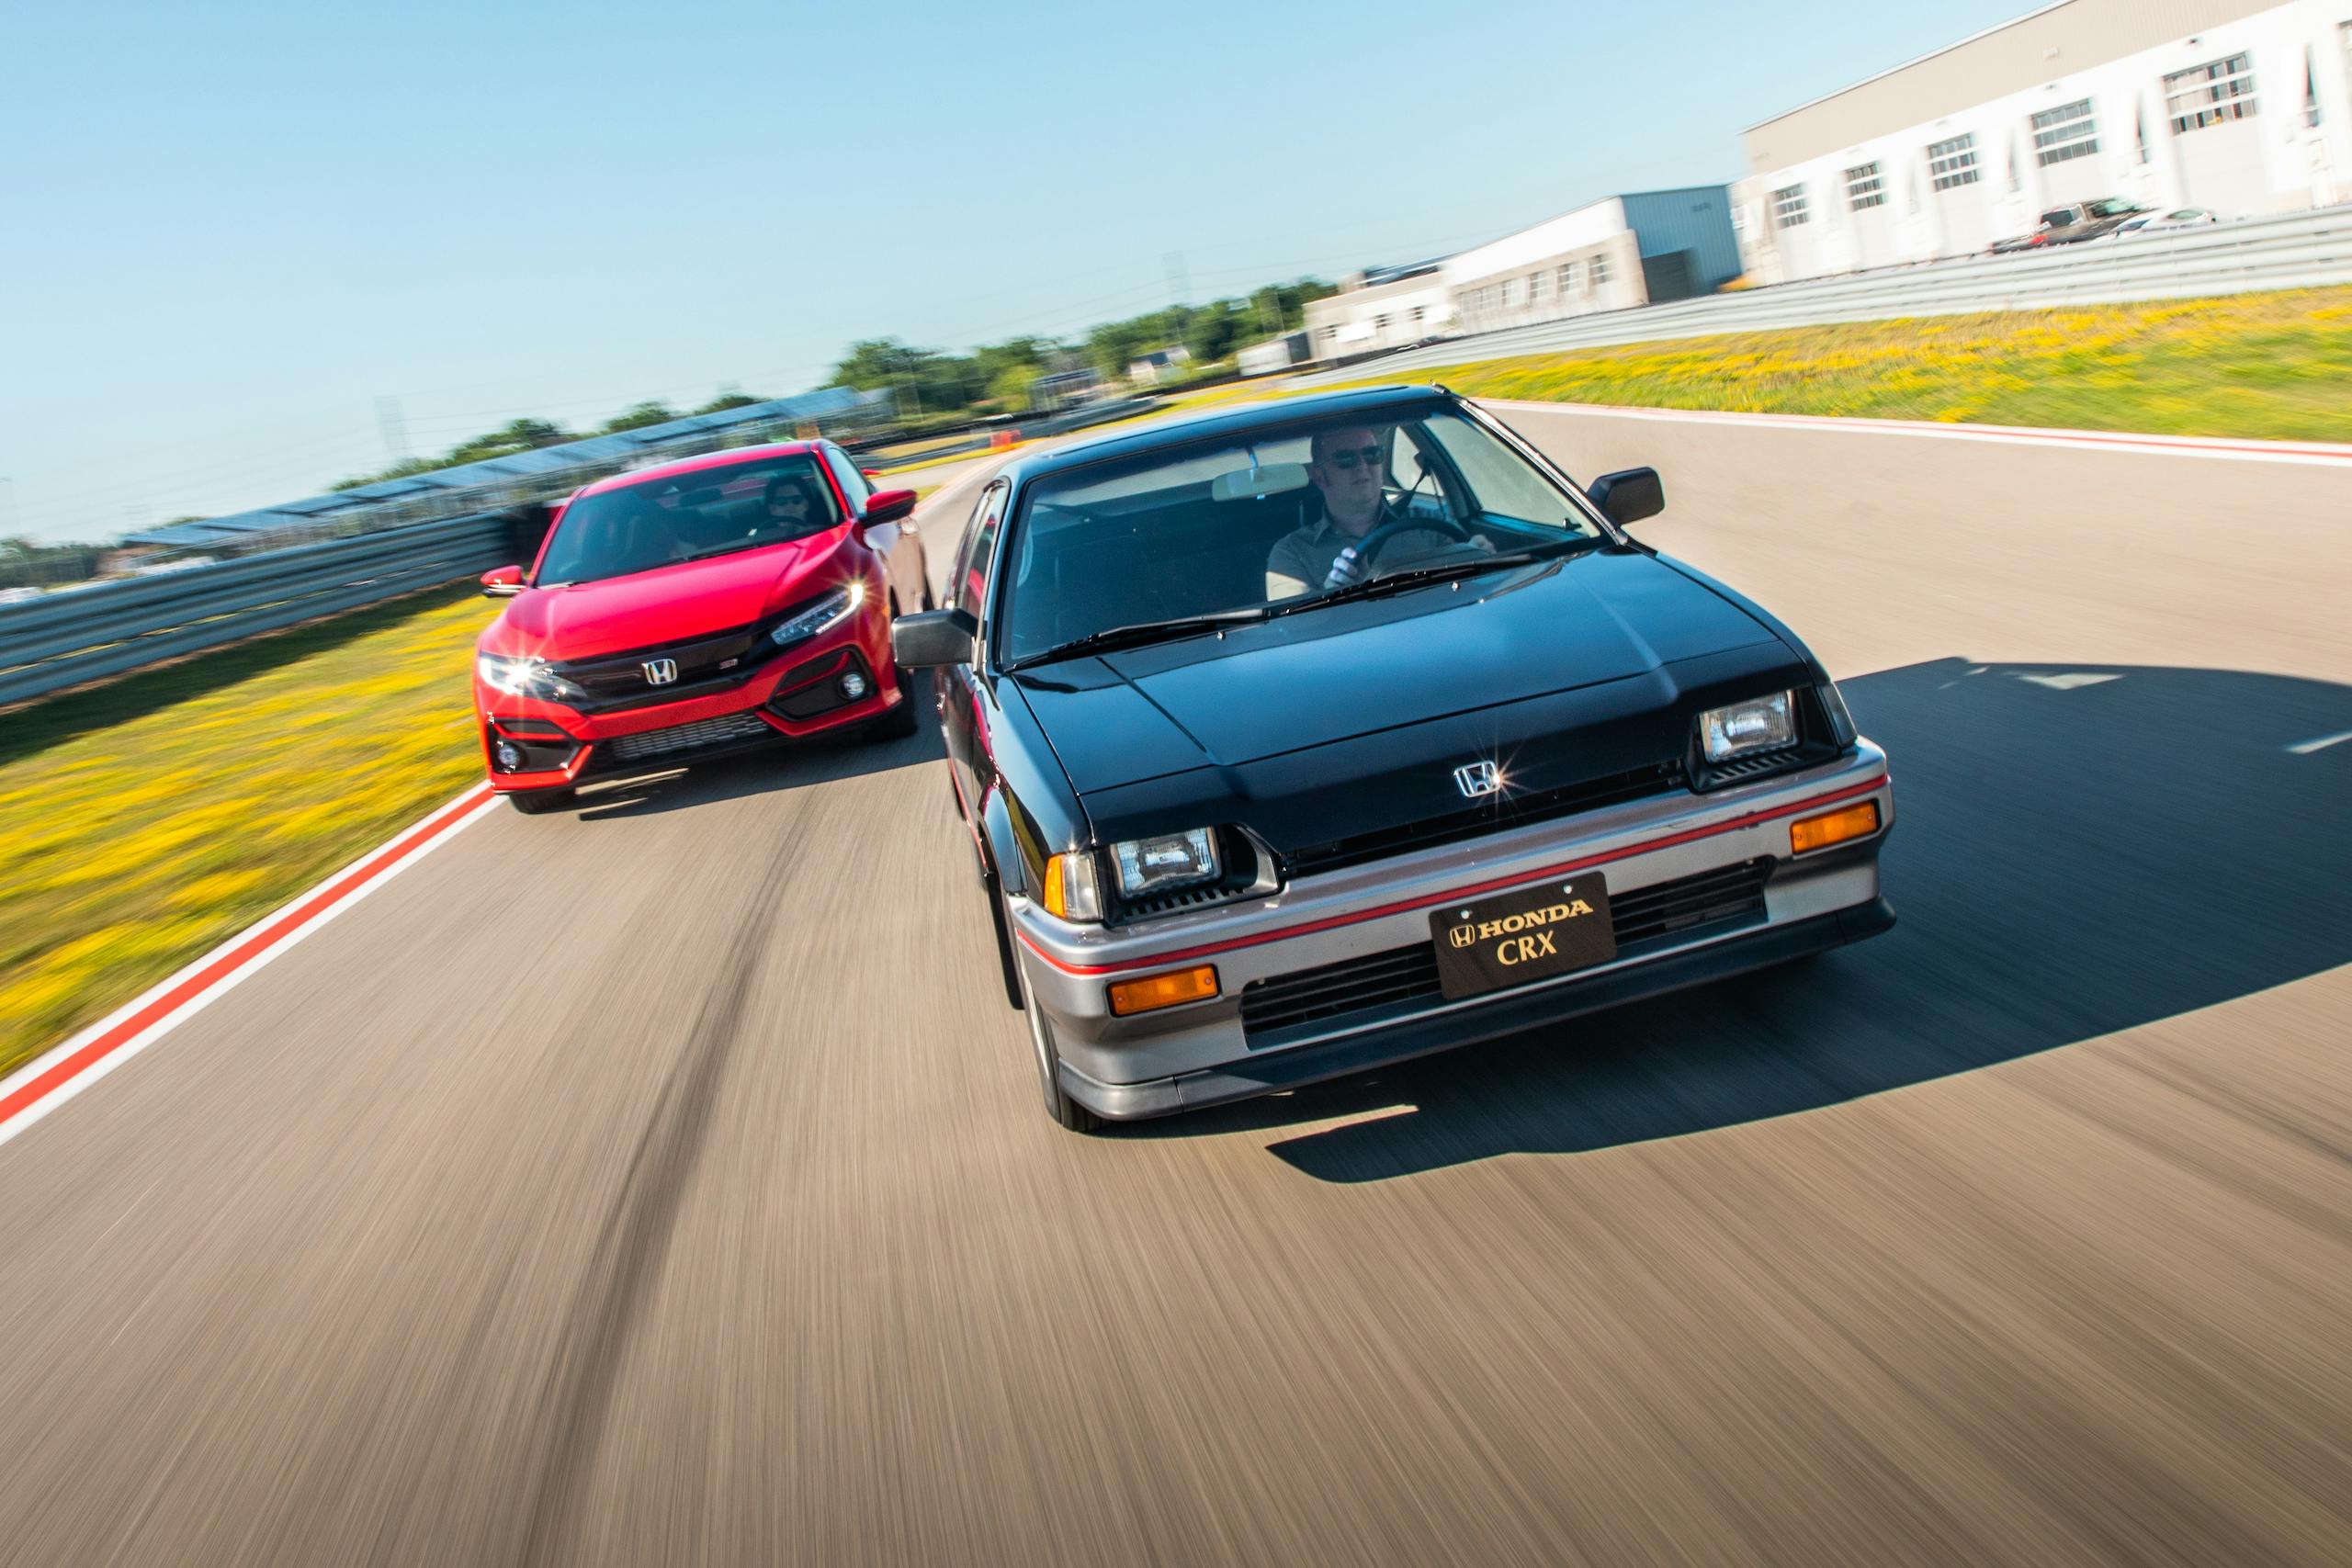 1985 CRX Si and 2020 Civic Si track action